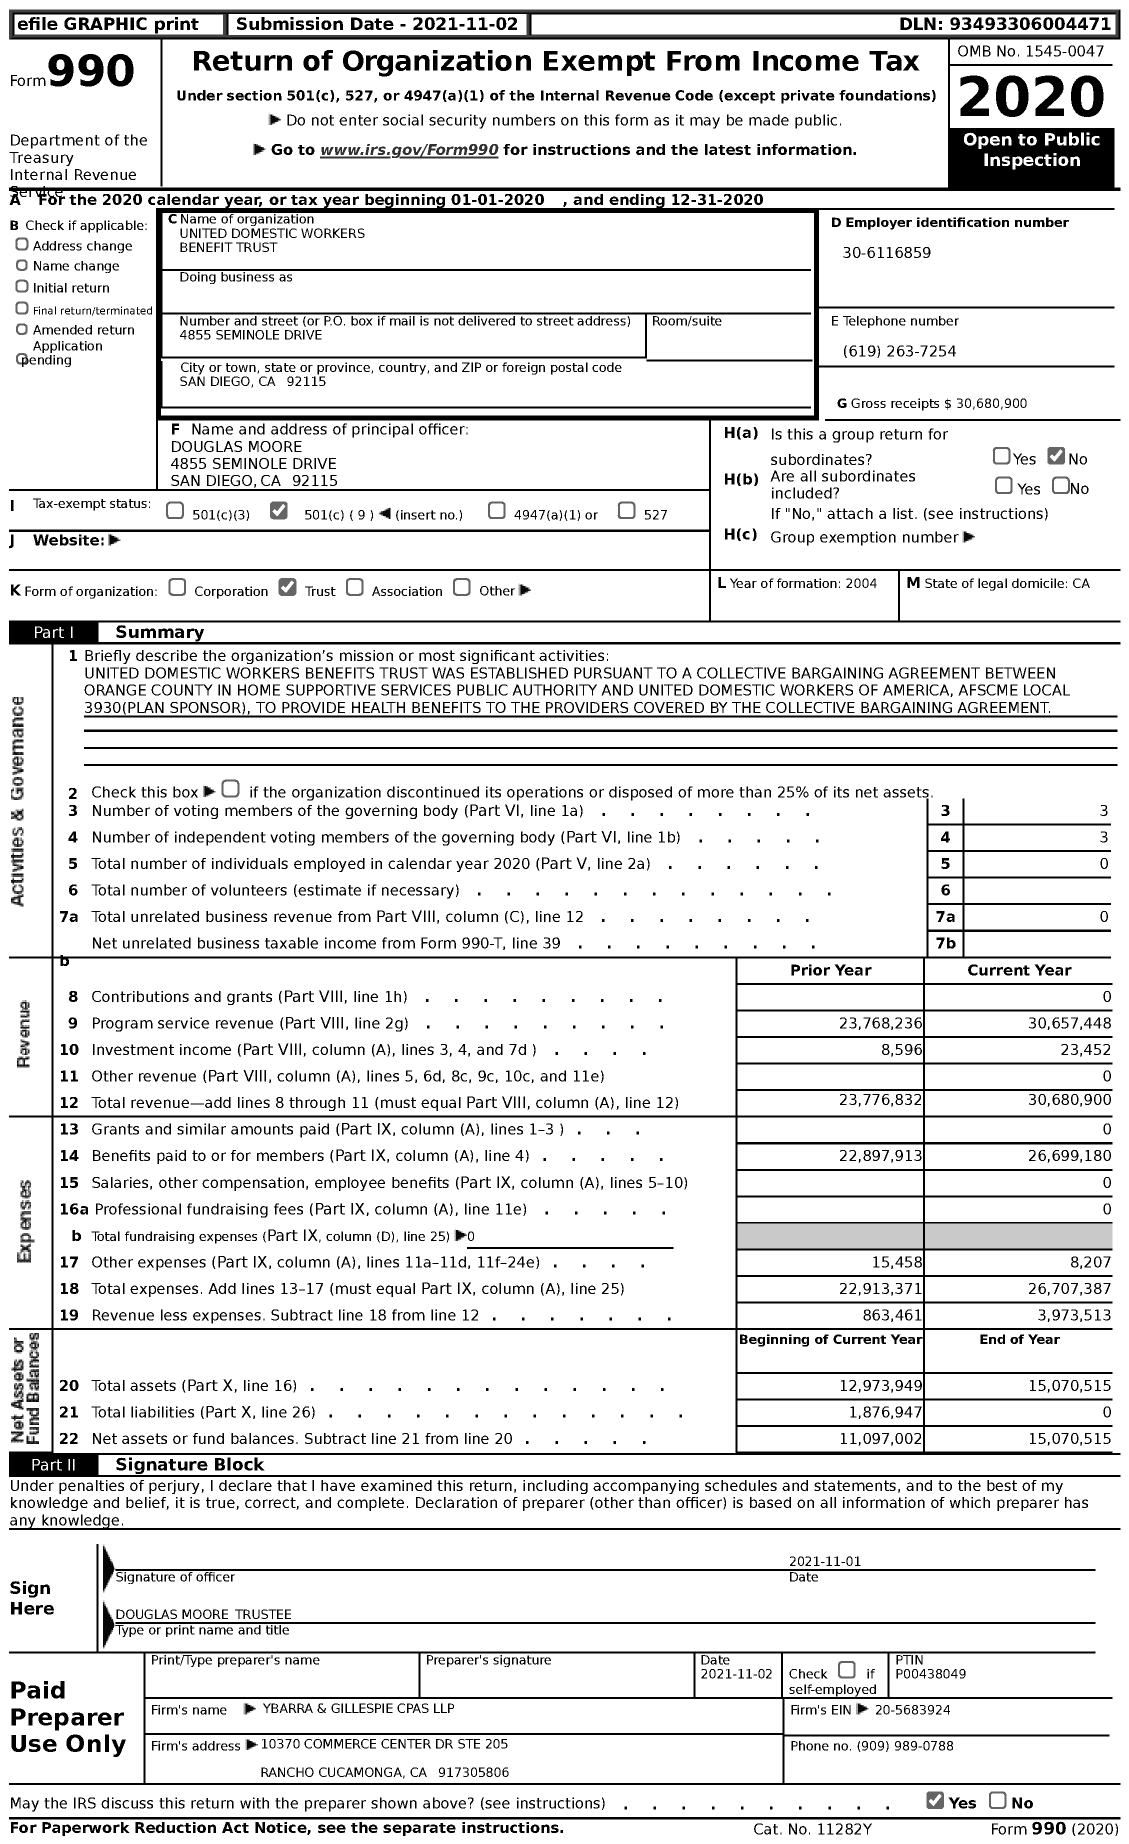 Image of first page of 2020 Form 990 for United Domestic Workers Benefits Trust